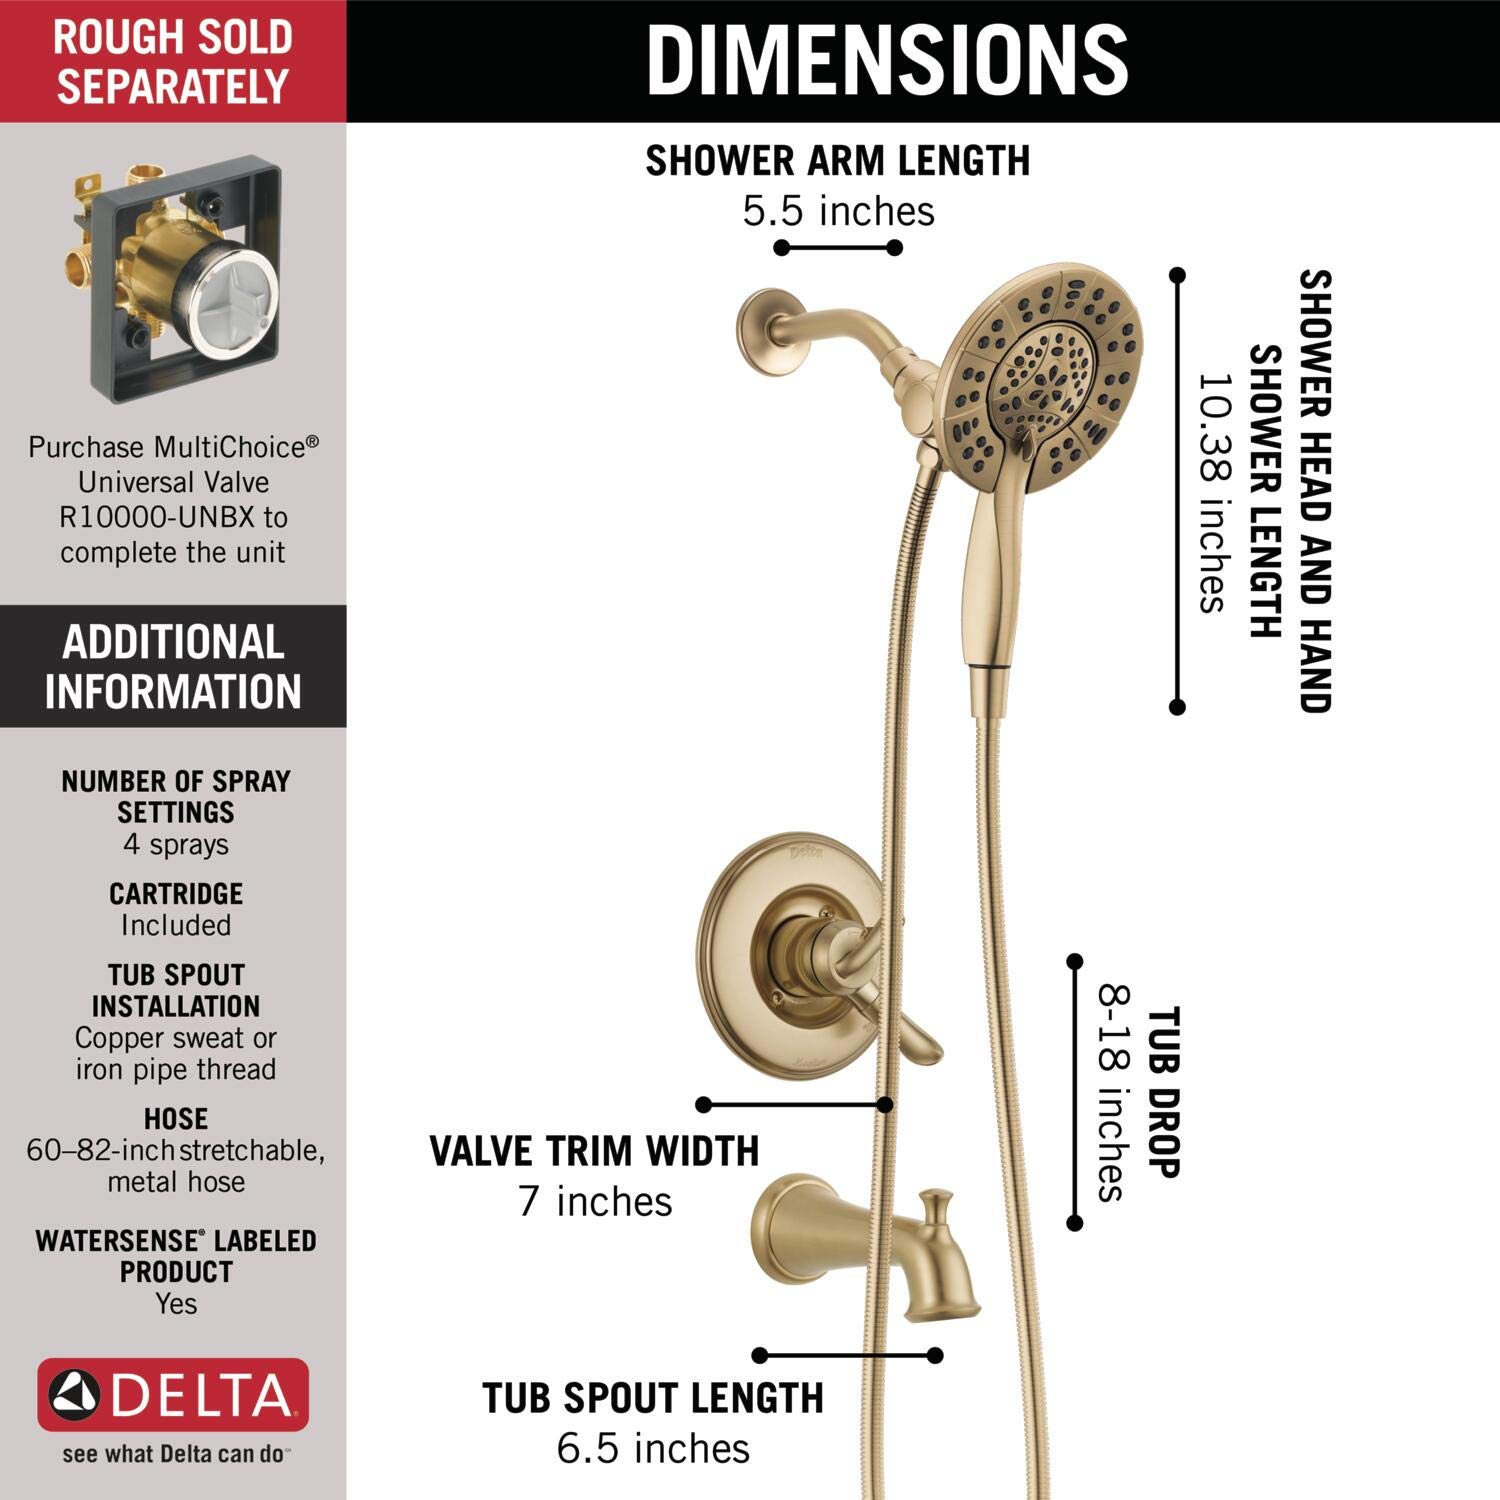 Delta Faucet Linden 17 Series Dual-Function Tub and Shower Trim Kit, Shower Faucet with 4-Spray In2ition 2-in-1 Dual Hand Held Shower Head with Hose, Champagne Bronze T17494-CZ-I (Valve Not Included)